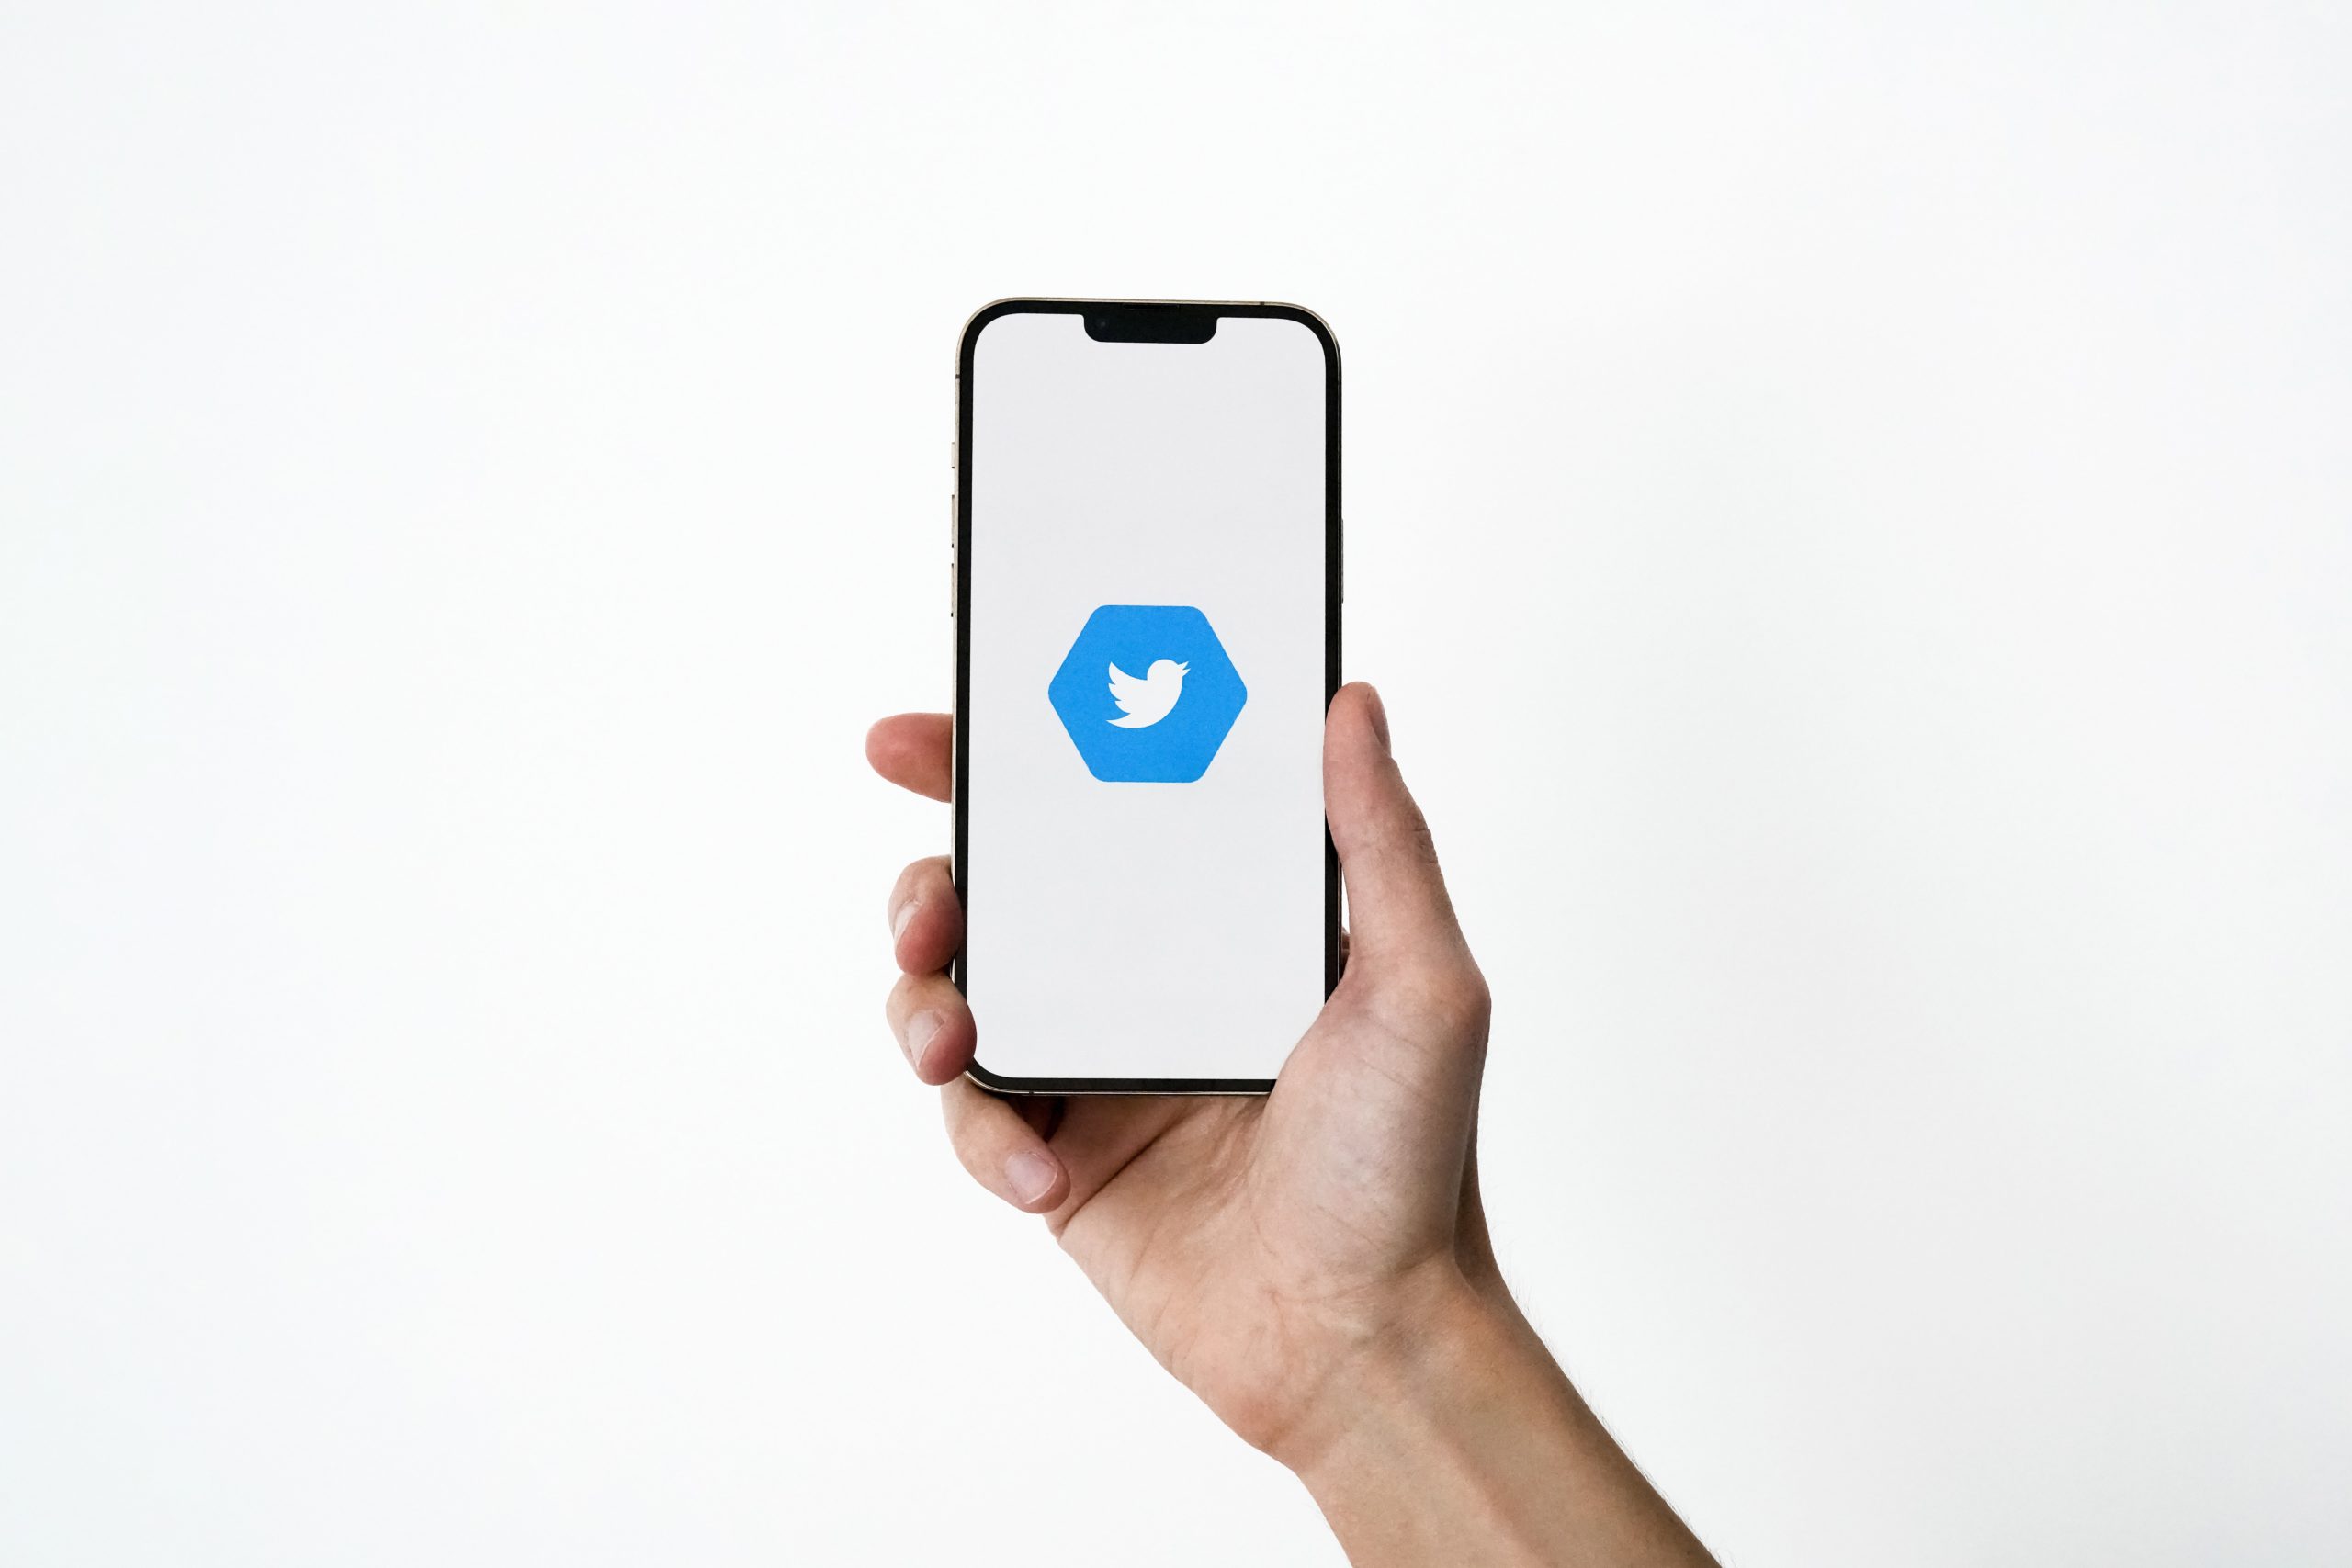 A human hand holding a smartphone that is displaying the Twitter logo on it (a white bird on a blue background)